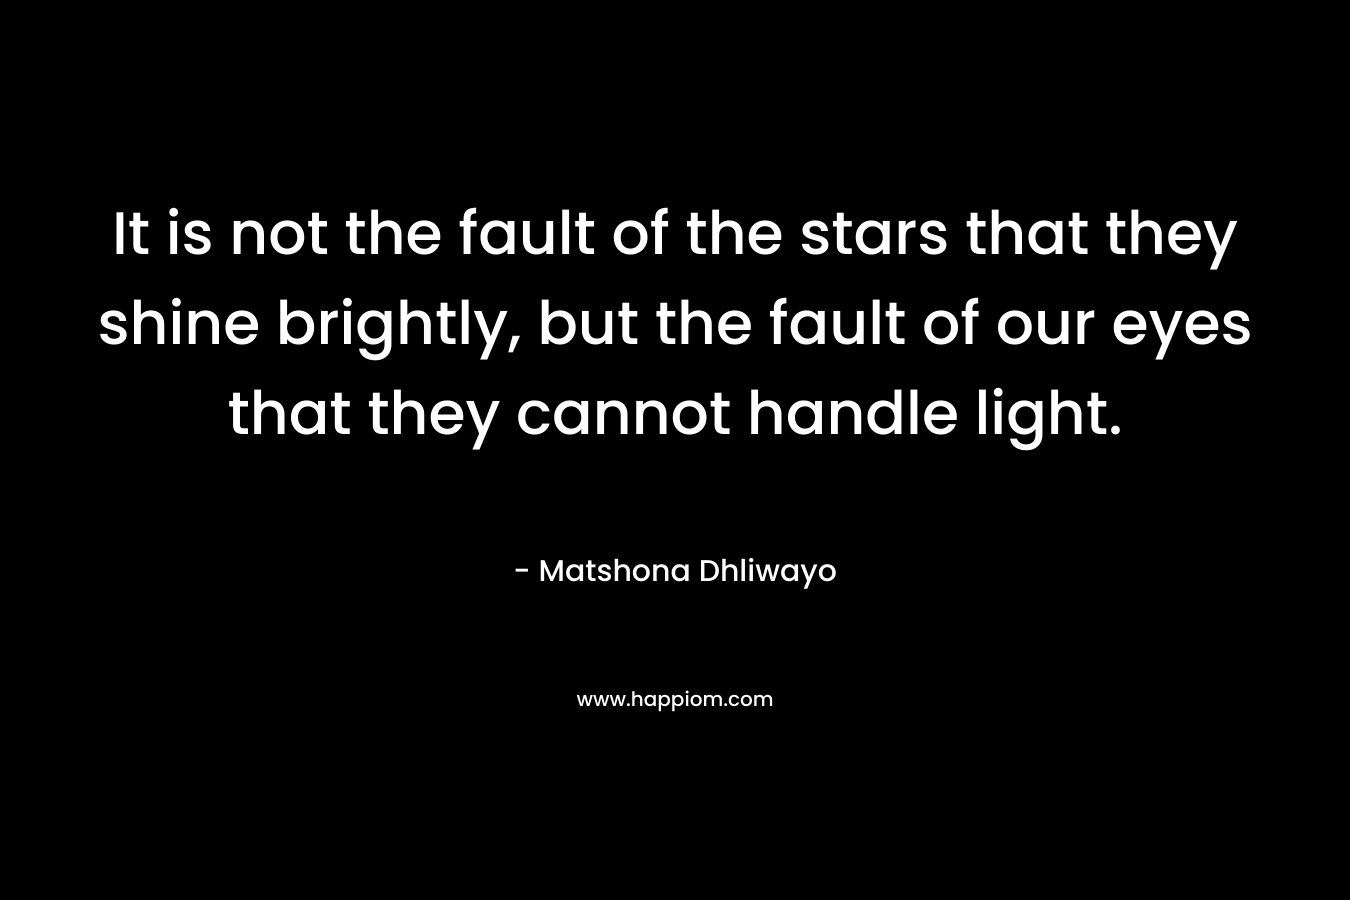 It is not the fault of the stars that they shine brightly, but the fault of our eyes that they cannot handle light.